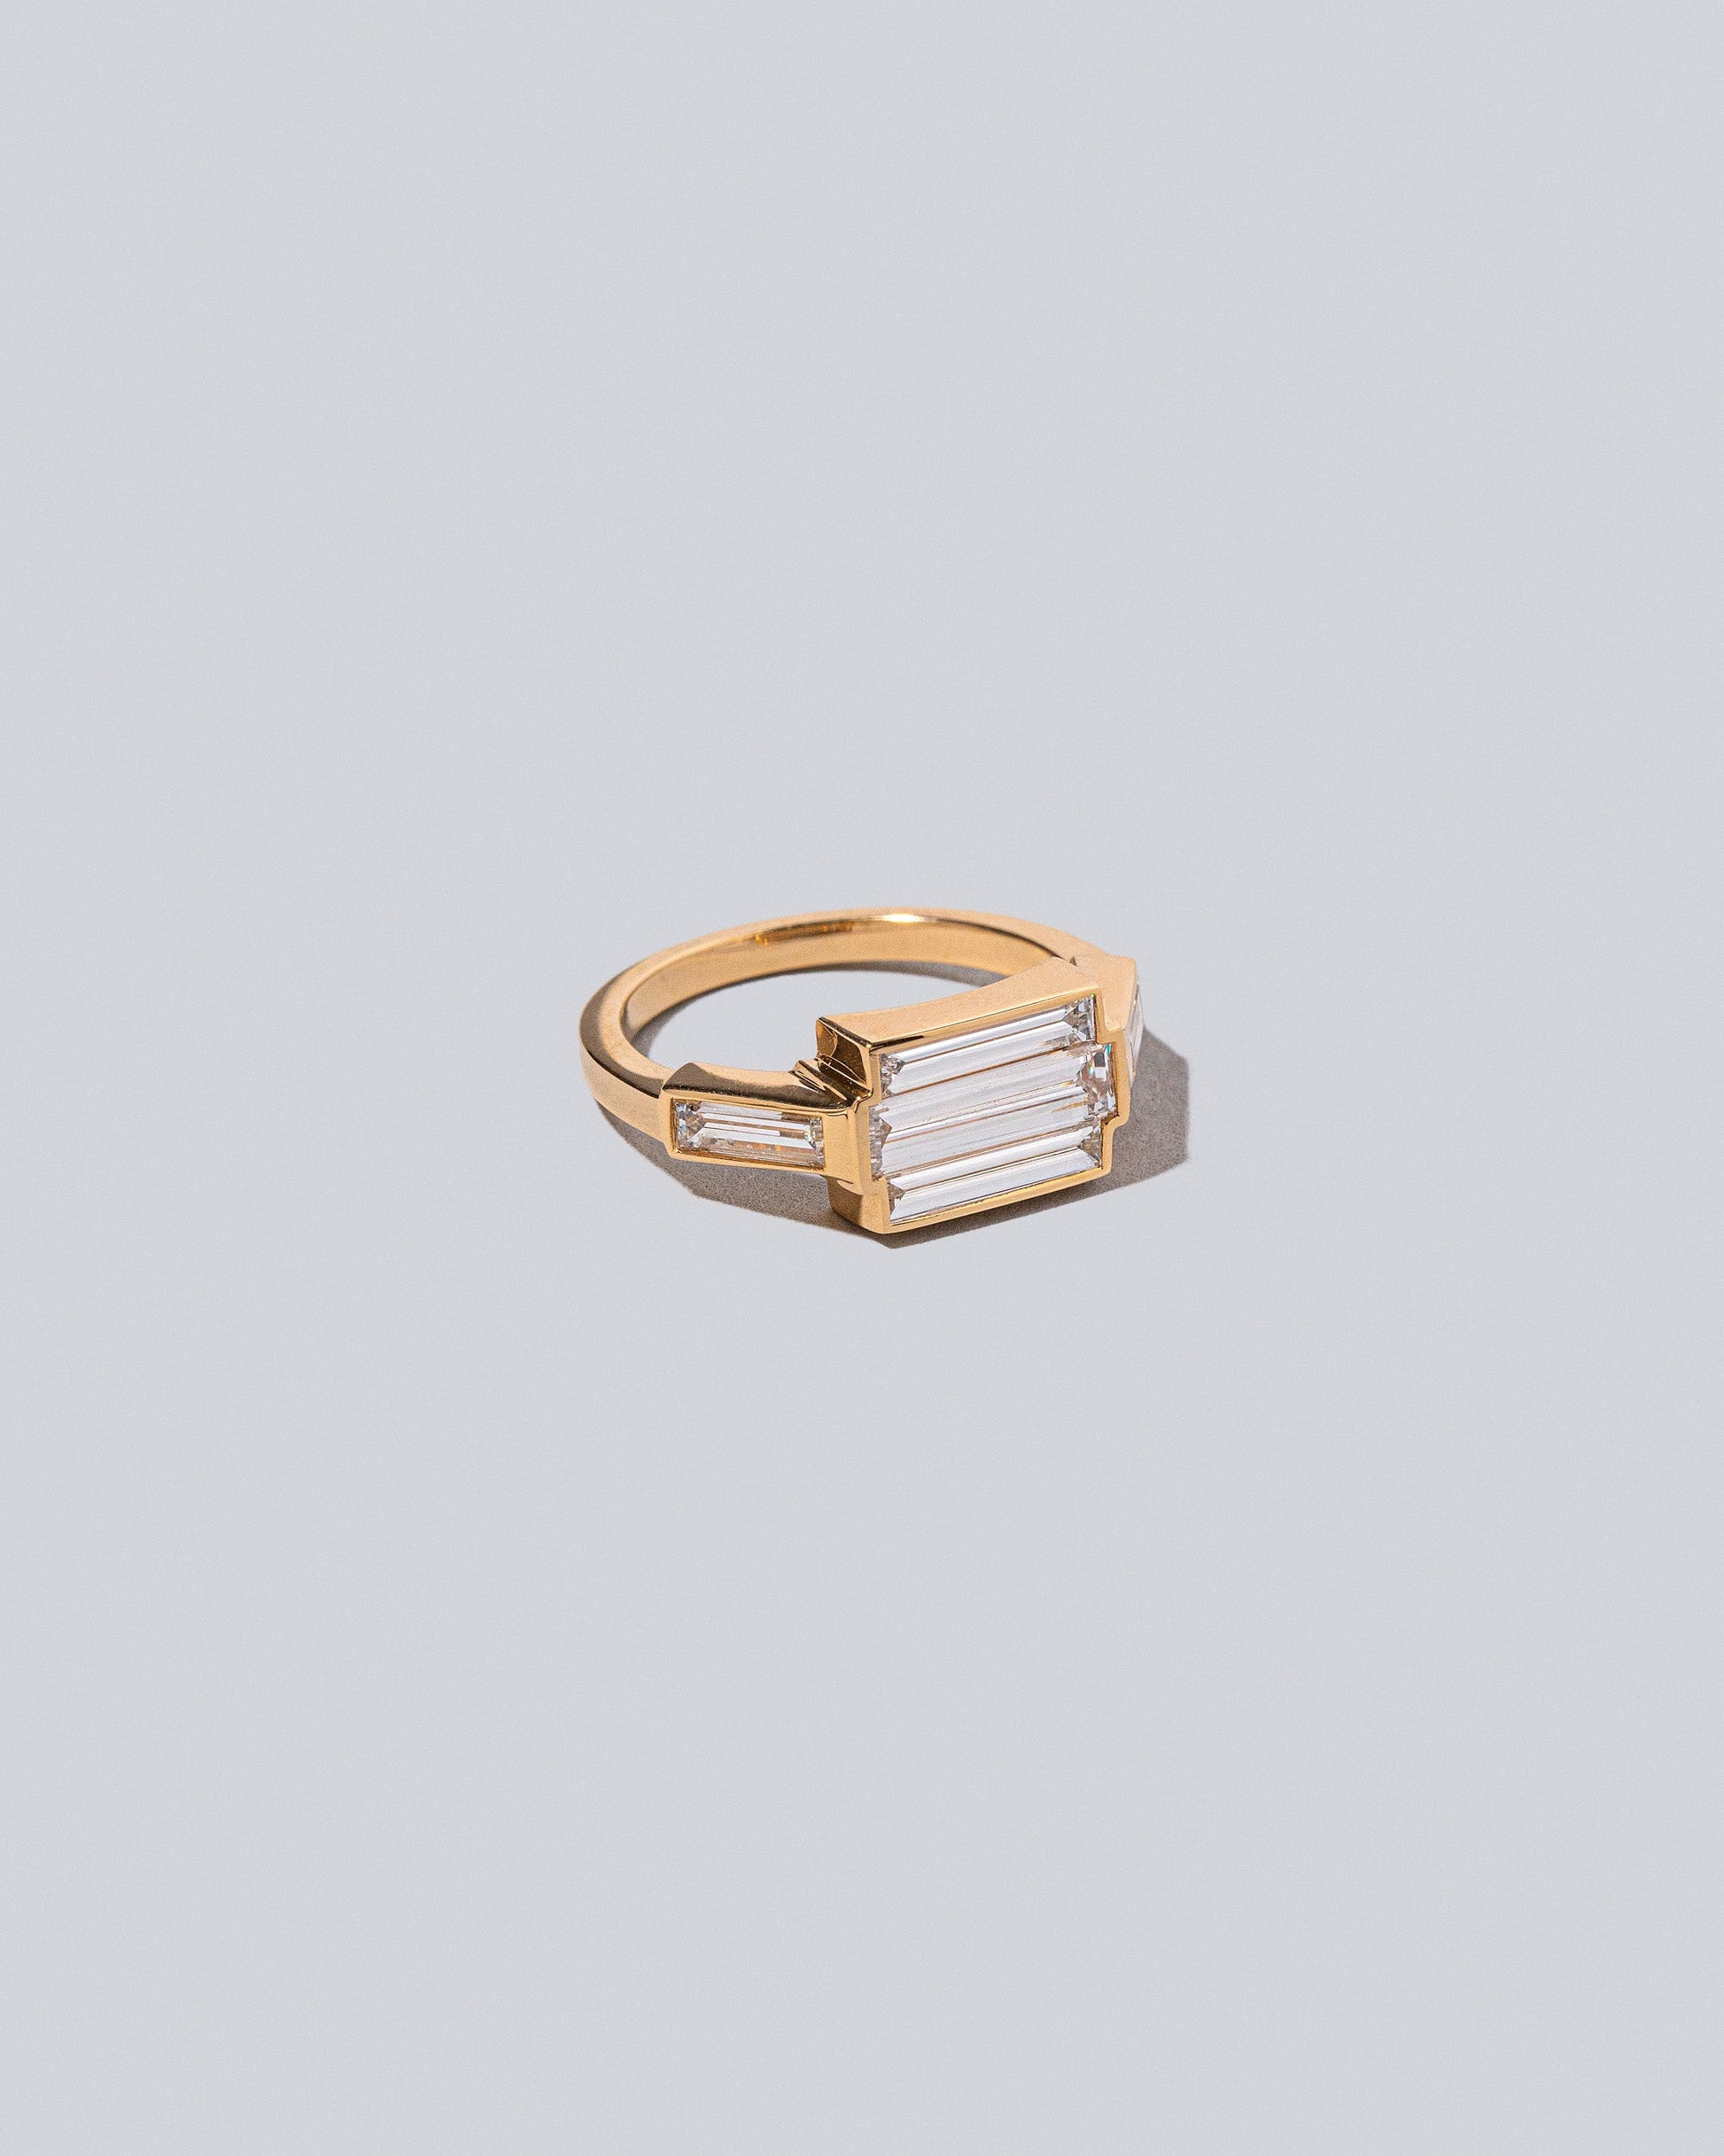 Product photo of the Haiku Ring on light light color background.